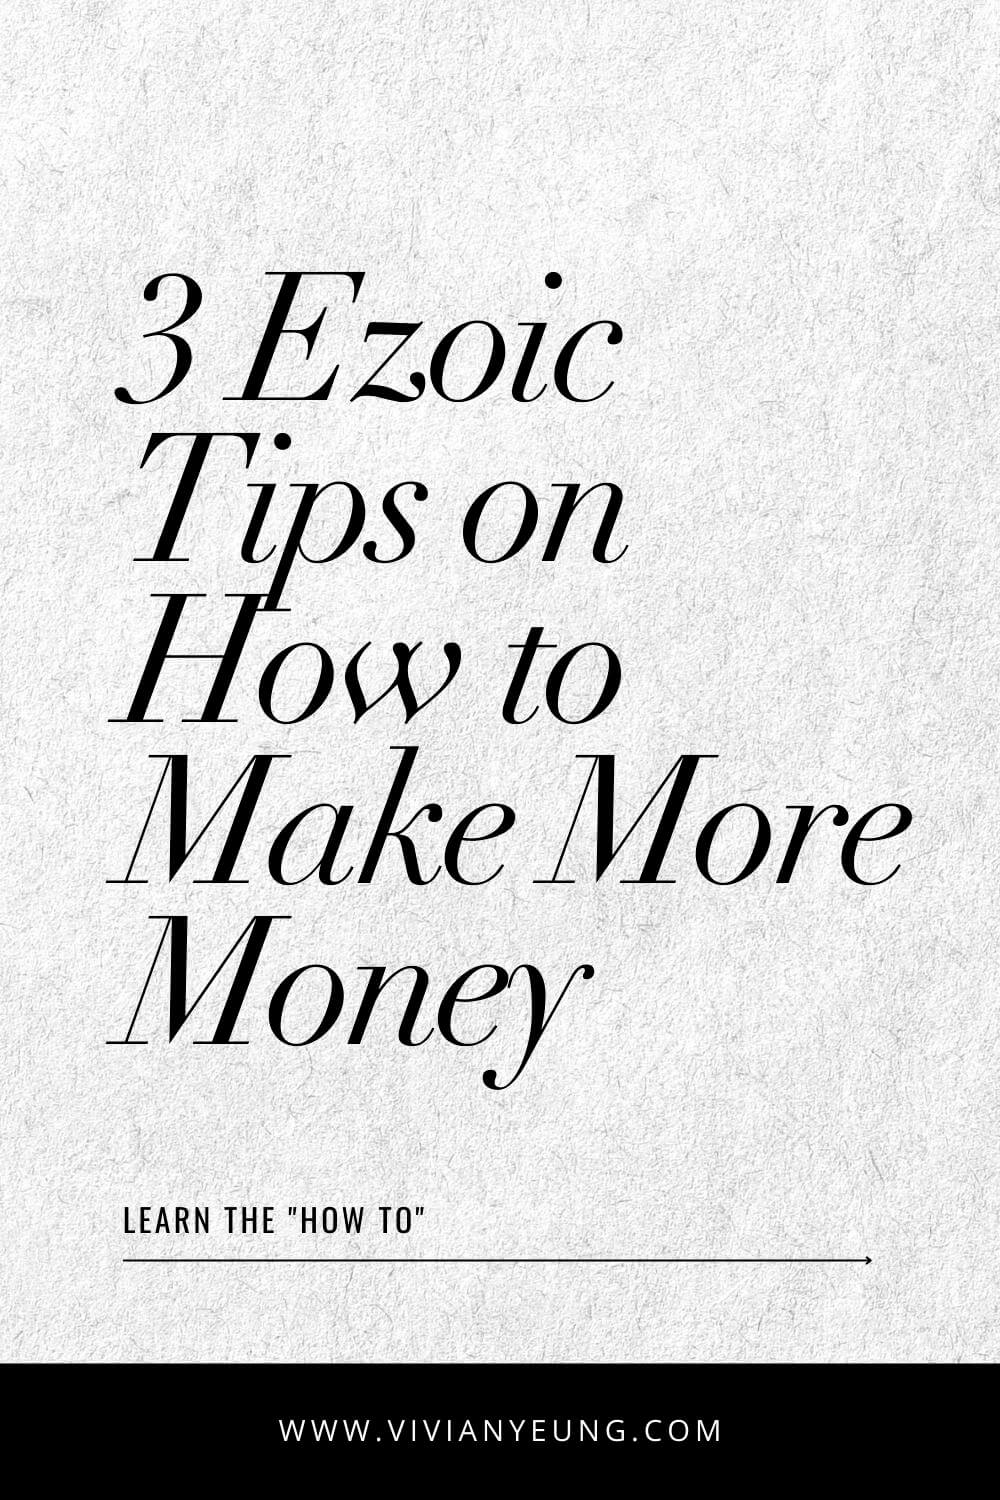 Ezoic Tips and Tricks Ads Revenue How to Make More Money with Ezoic